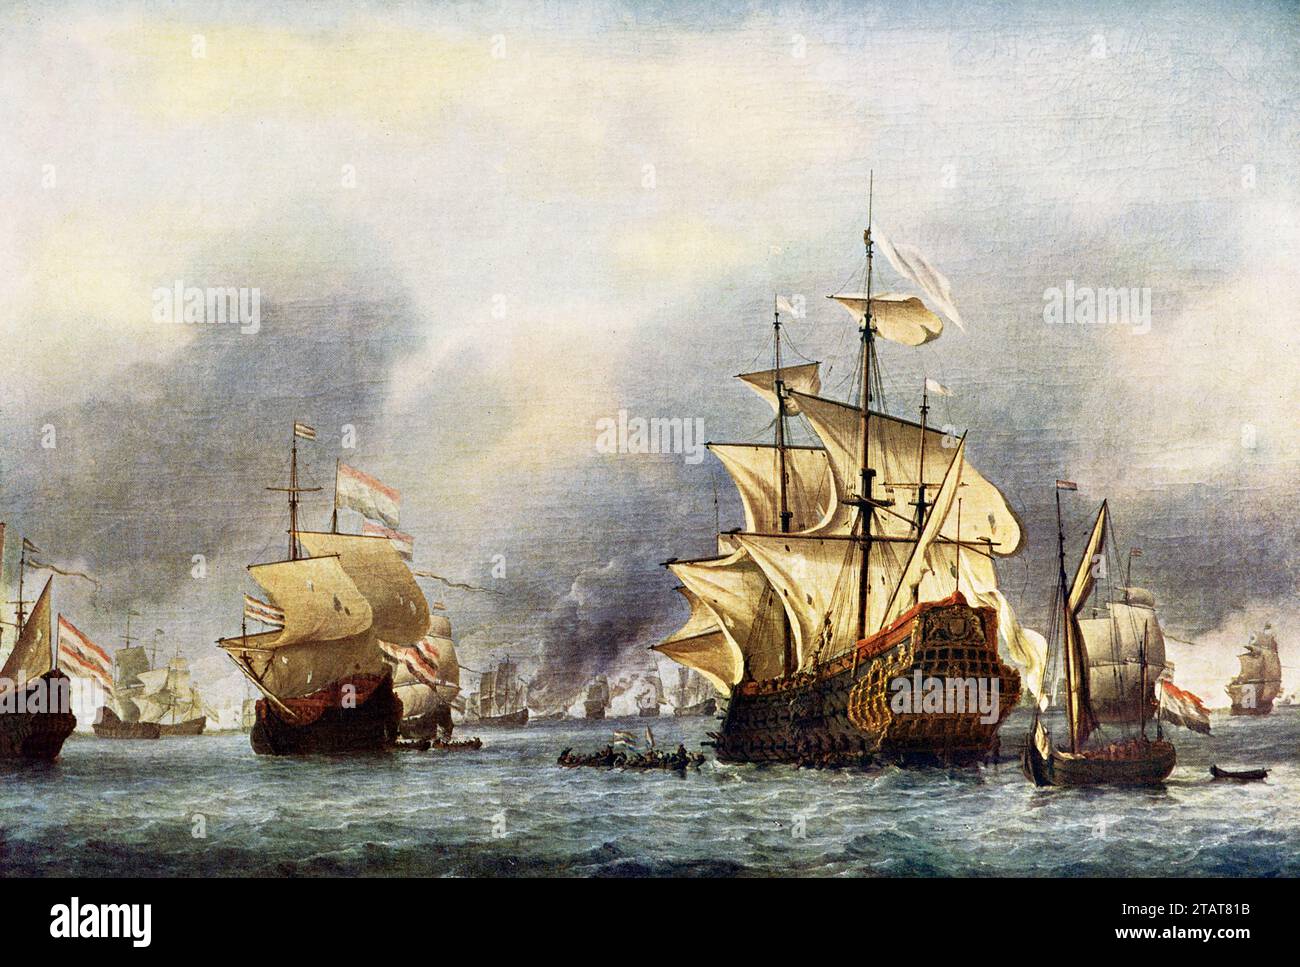 This image shows:  “Sea fight between England and Holland June 1666.” This conquest of the English ship “Royal Prince” occurred on June 13, 1666.  was painted by Willem van der Velde, the Younger (1633-1707). It is housed in the Rijksmuseum in Amsterdam. On 13 June 1666, the third day of the Four Days’ Battle, the English flagship the Royal Prince ran aground on a sandbank off the English coast. It was then captured by Cornelis Tromp, who transferred its crew to his vessel, the Gouda (at left). Admiral de Ruyter commanded Tromp to burn this prize. He would have preferred to tow it back to the Stock Photo